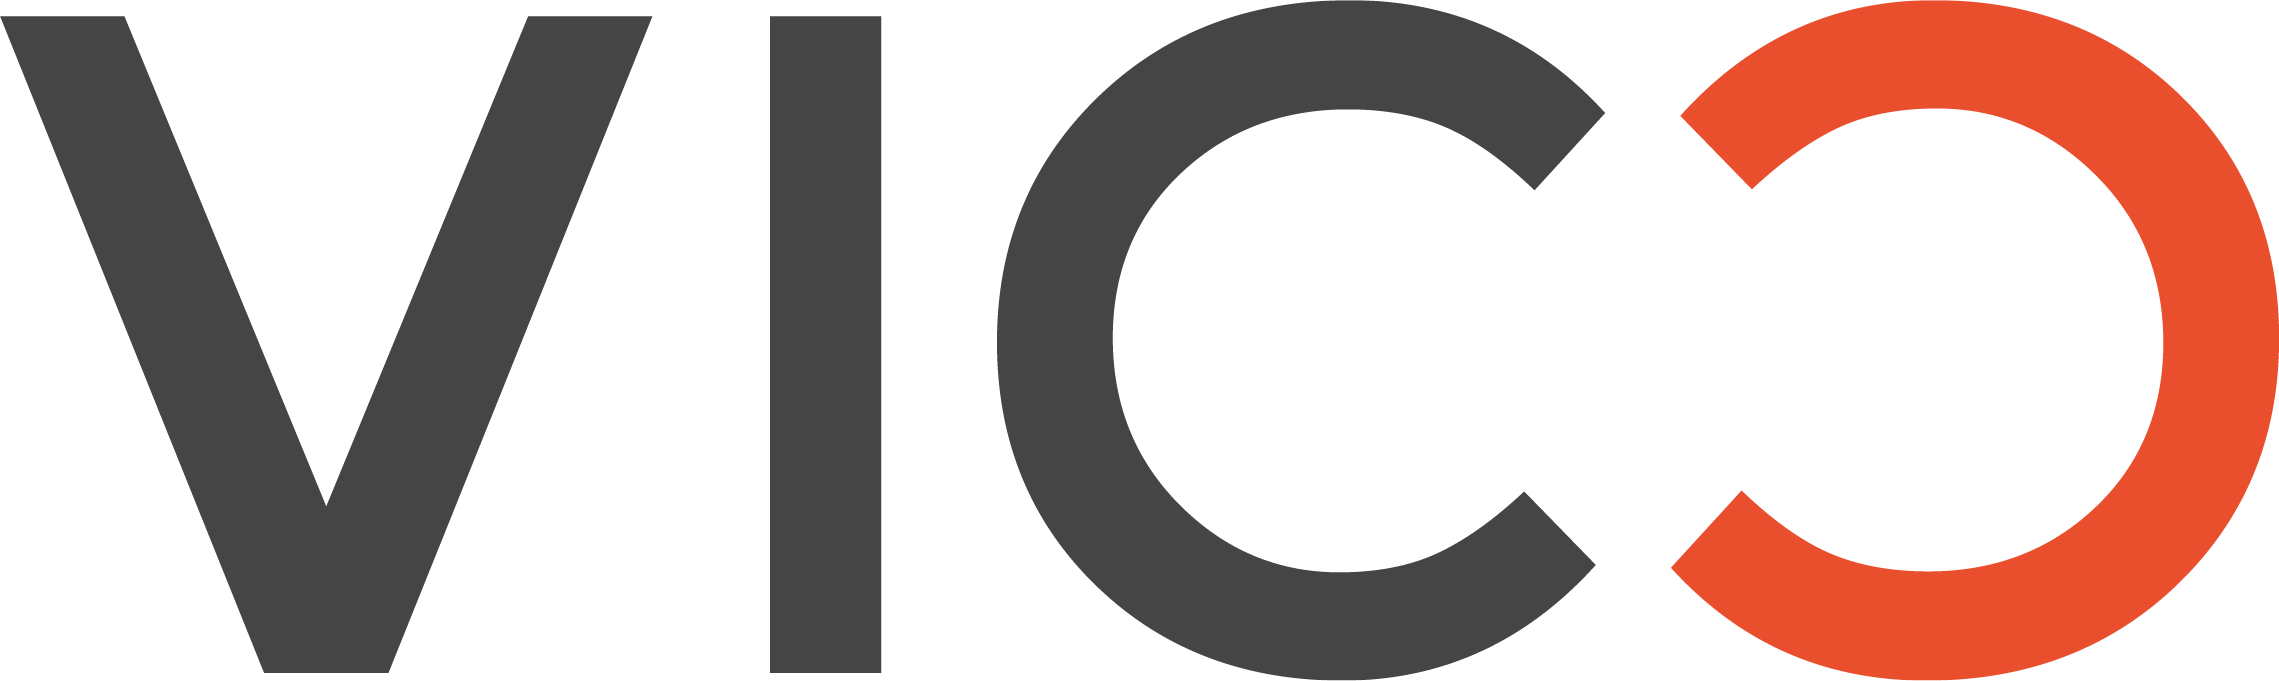 VICO Research & Consulting GmbH_logo